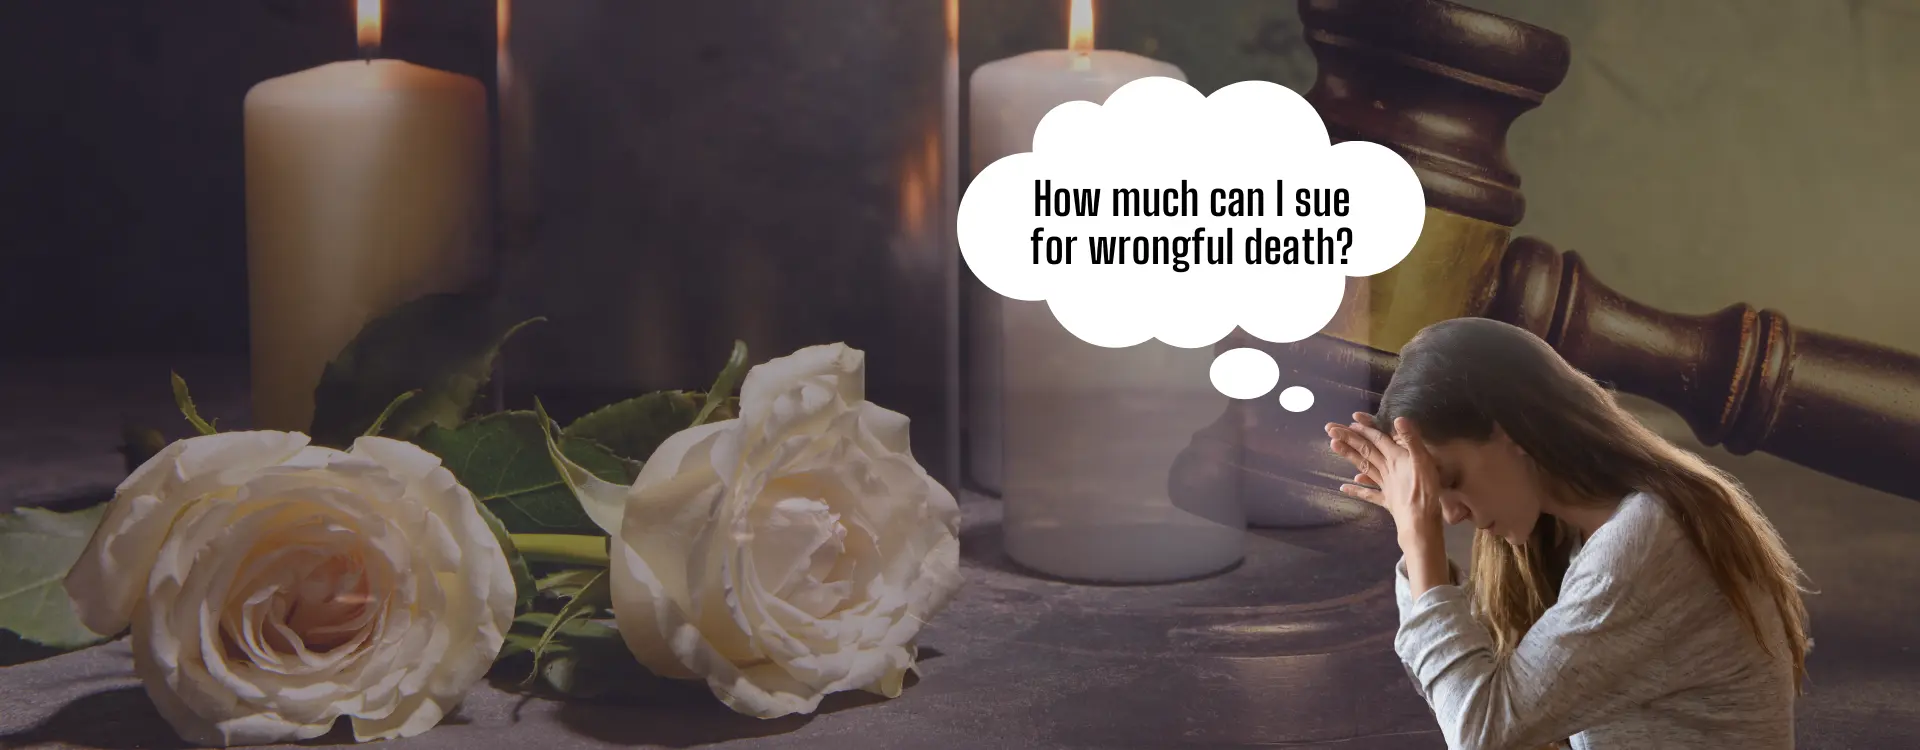 how much can you sue for wrongful death